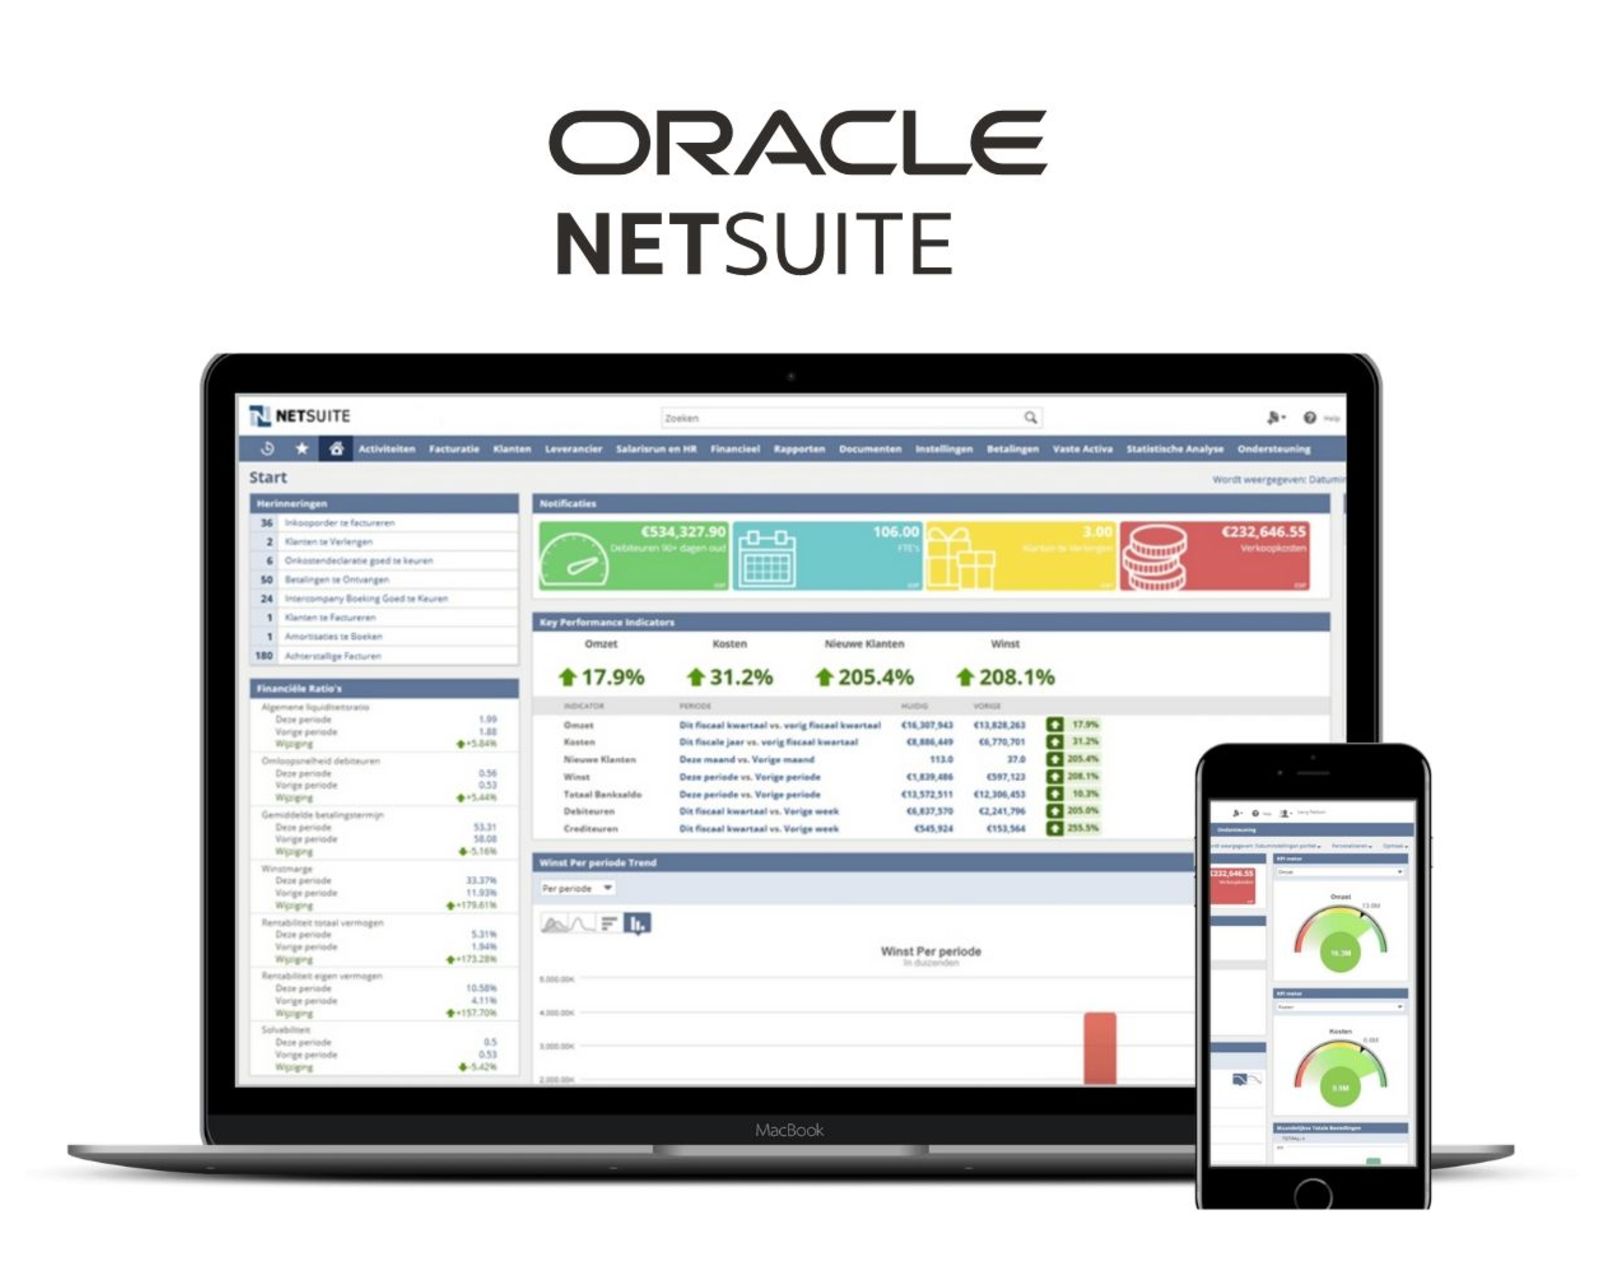 Oracle NetSuite interface with logo 1600x1280